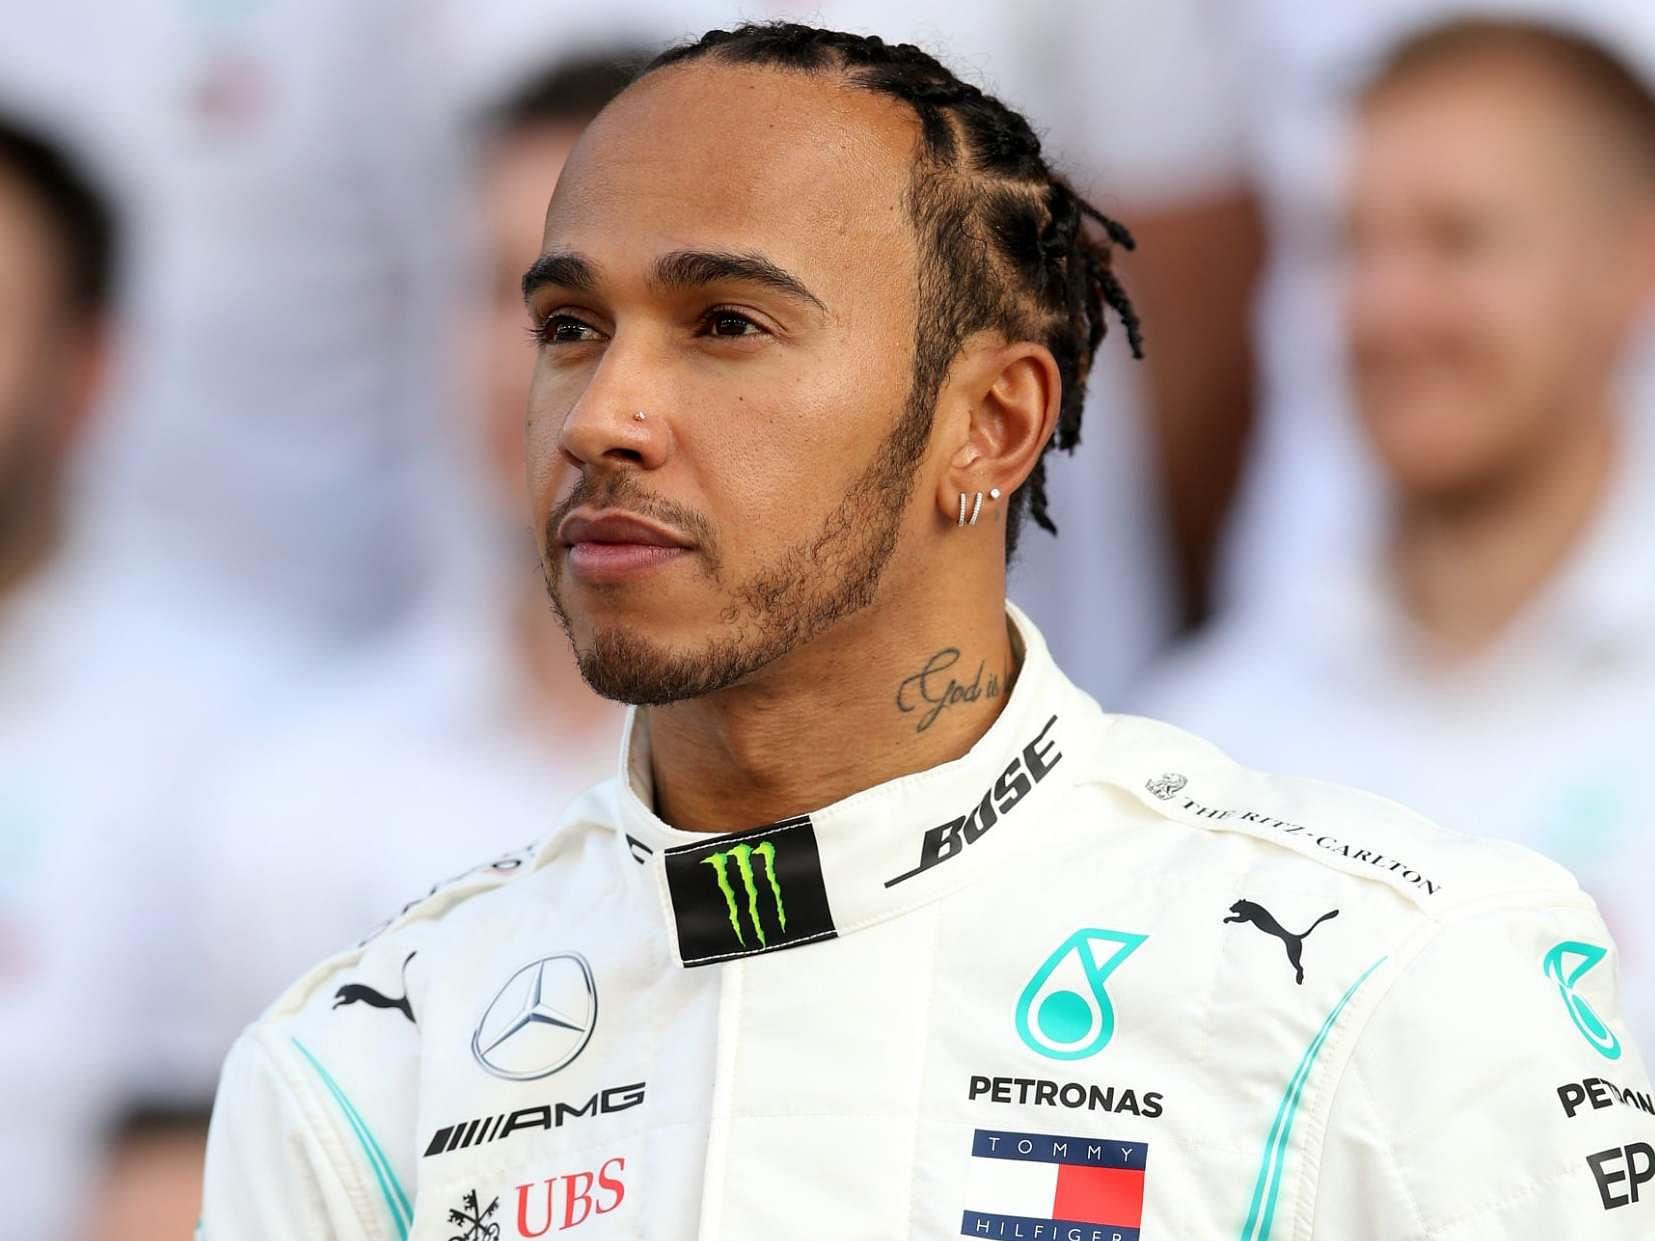 Netflix to accompany Mercedes' Lewis Hamilton at Sochi with Michael Schumacher's record set to be equalized